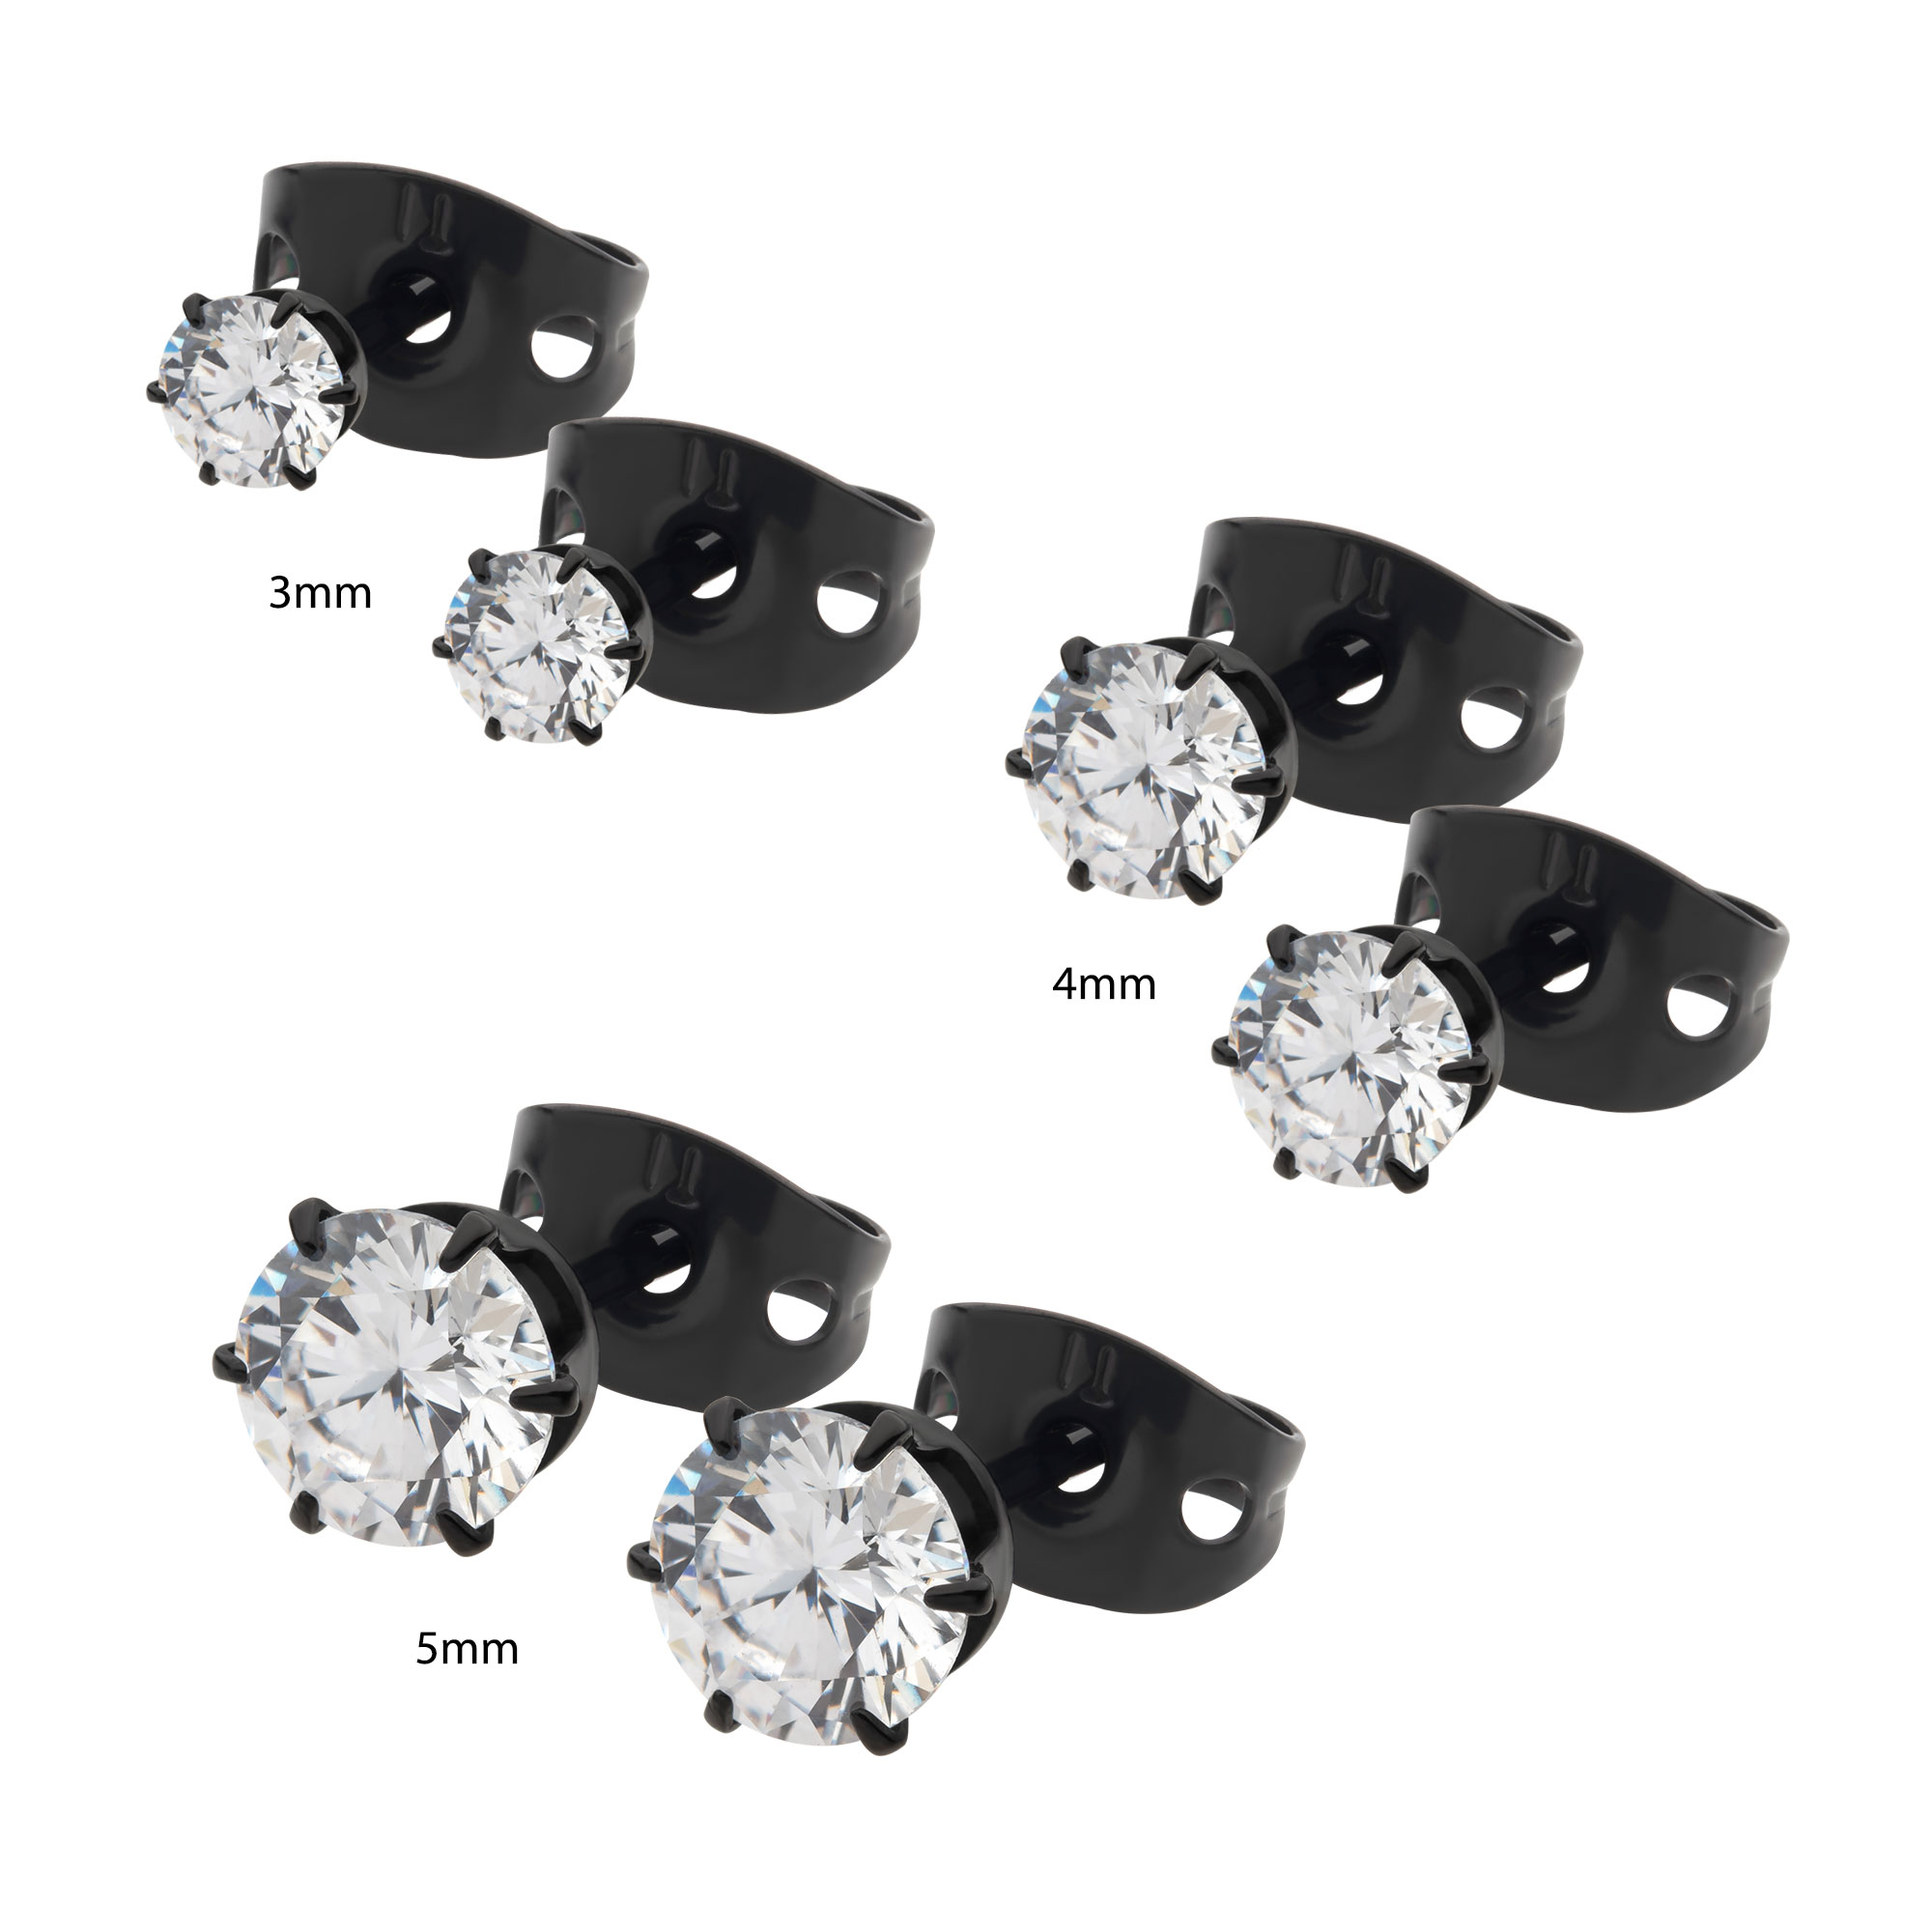 20g Black Plated Titanium Post and Butterfly Back with 6-Prong Set CZ Stud Earrings Image 3 Midtown Diamonds Reno, NV